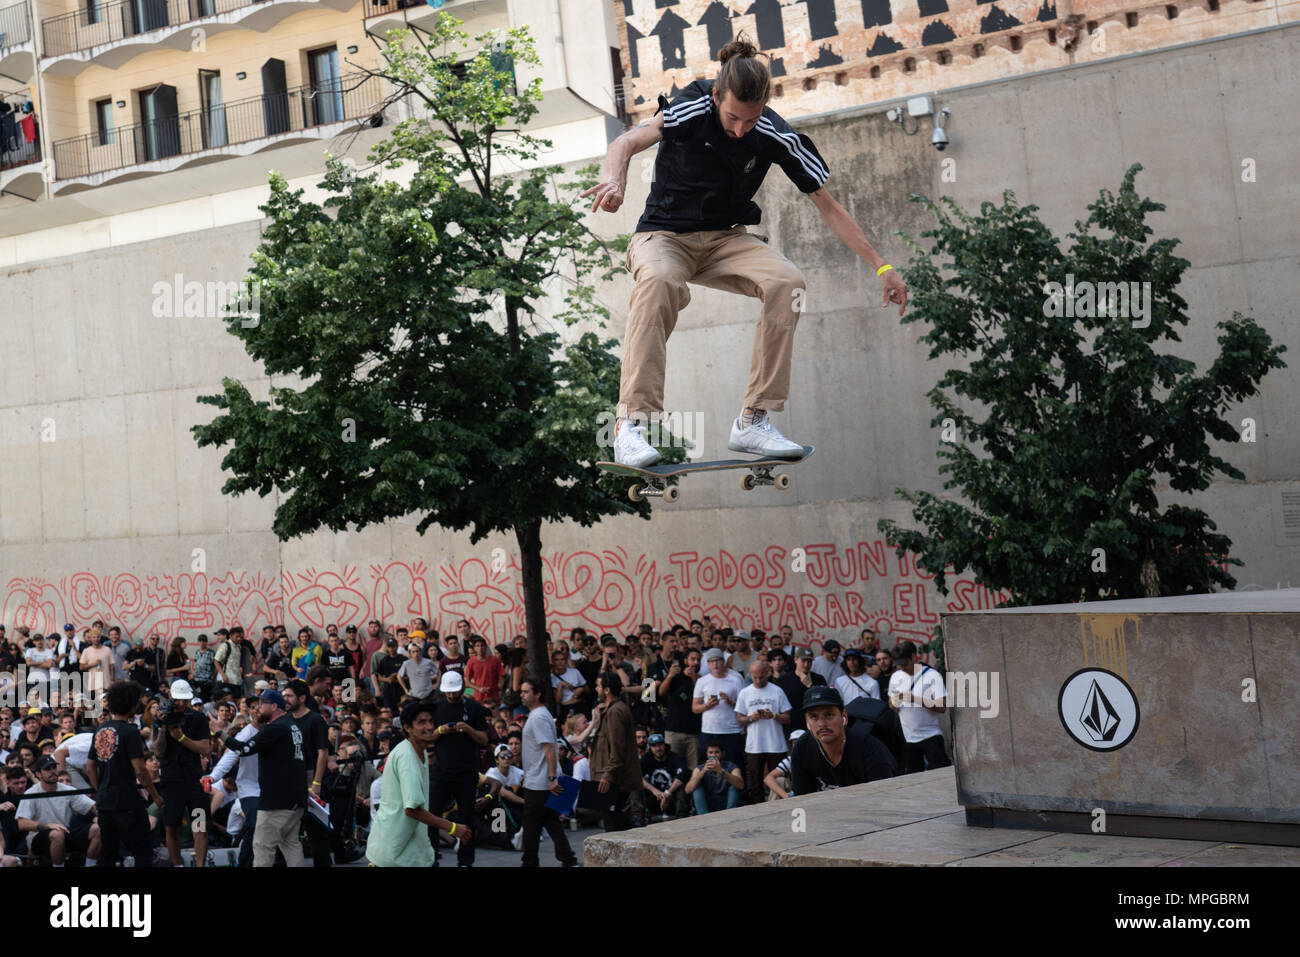 MACBA Museum, Barcelona, Catalonia, Spain, 23 May 2018 Thousands of  skateboard enthusiasts turned up to watch the 'Back To The 4' skateboard  competition at MACBA Museum in Barcelona. Skateboarding stars performed  dangerous